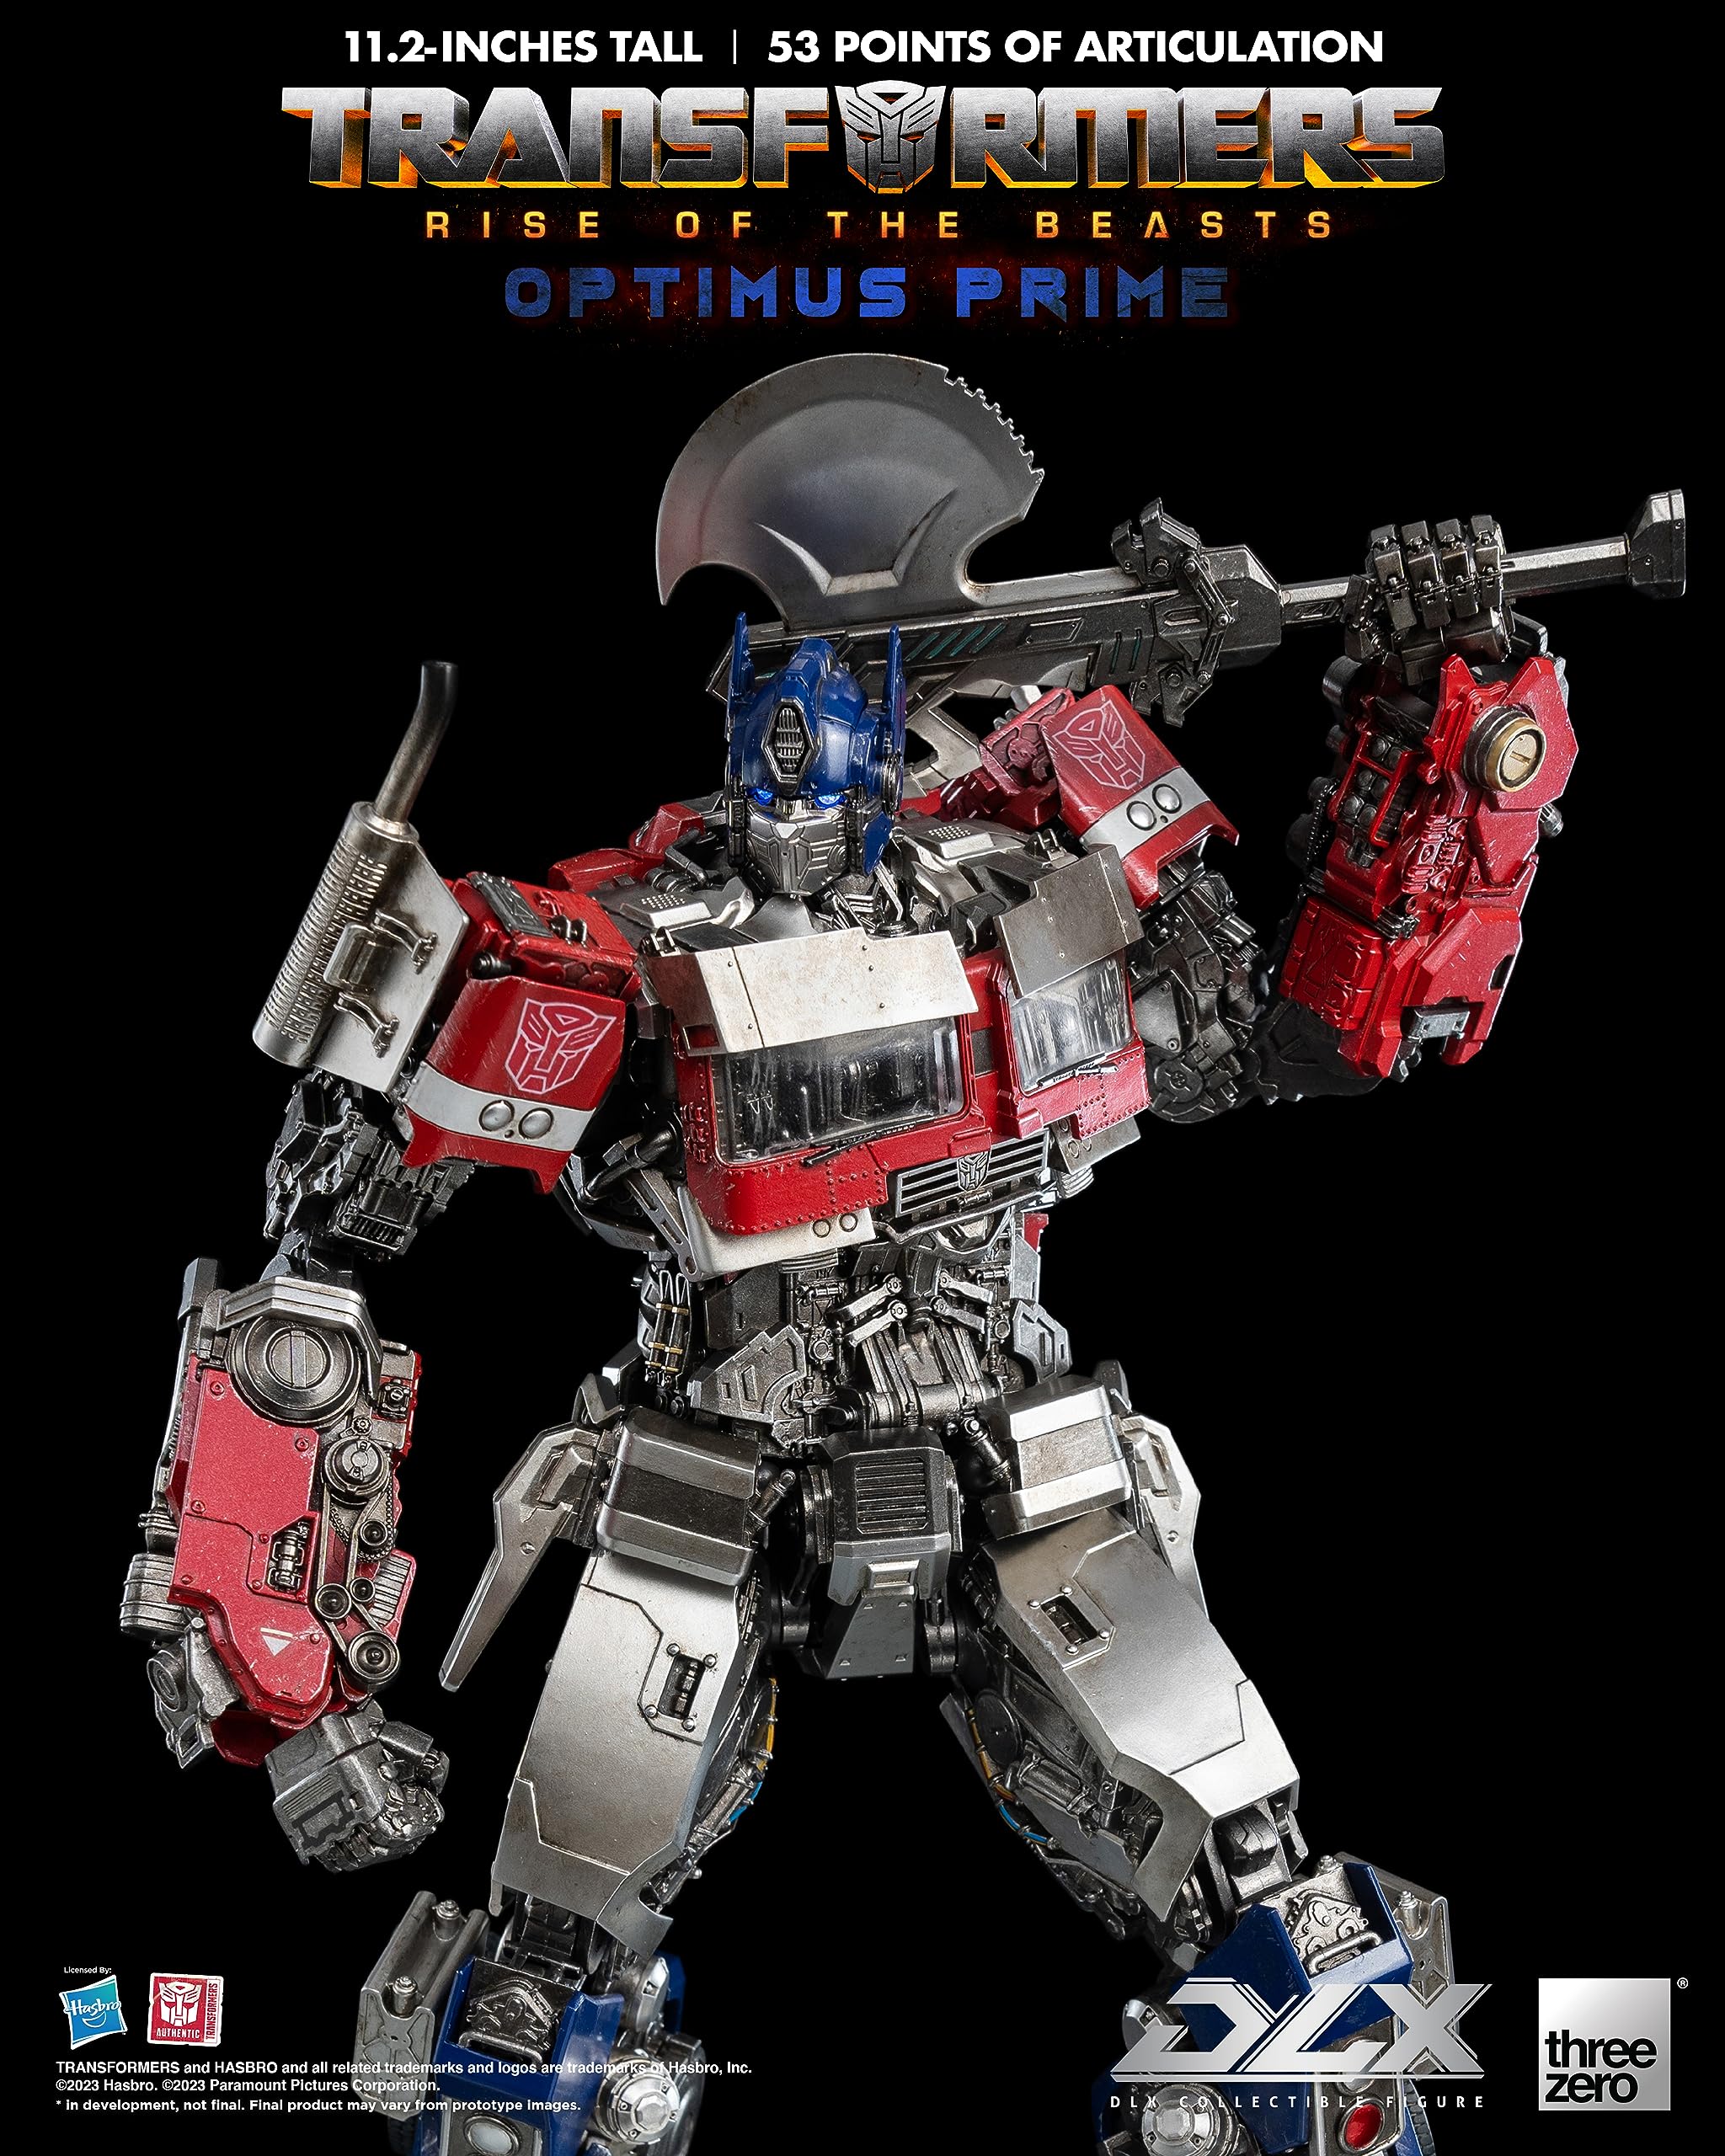 Transformers: Rise of The Beasts: DLX Optimus Prime 11.2-Inch Figure